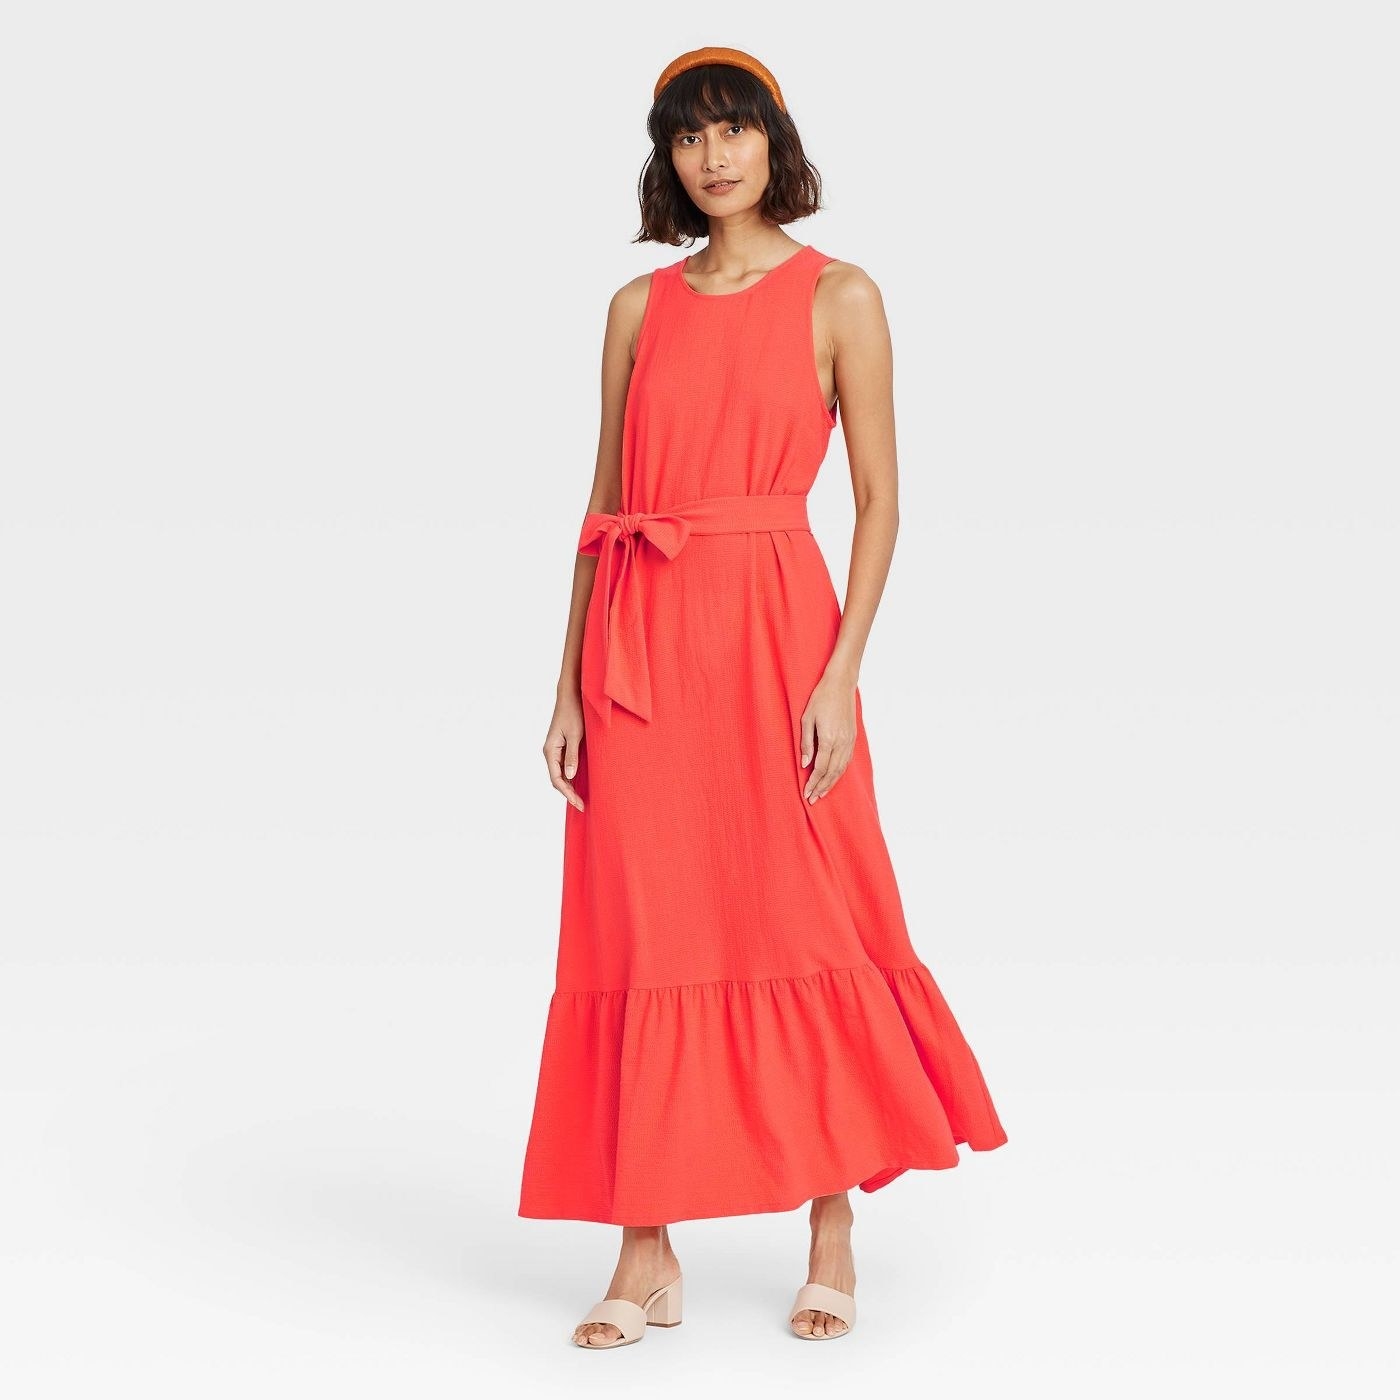 31 Stylish Summer Dresses From Target